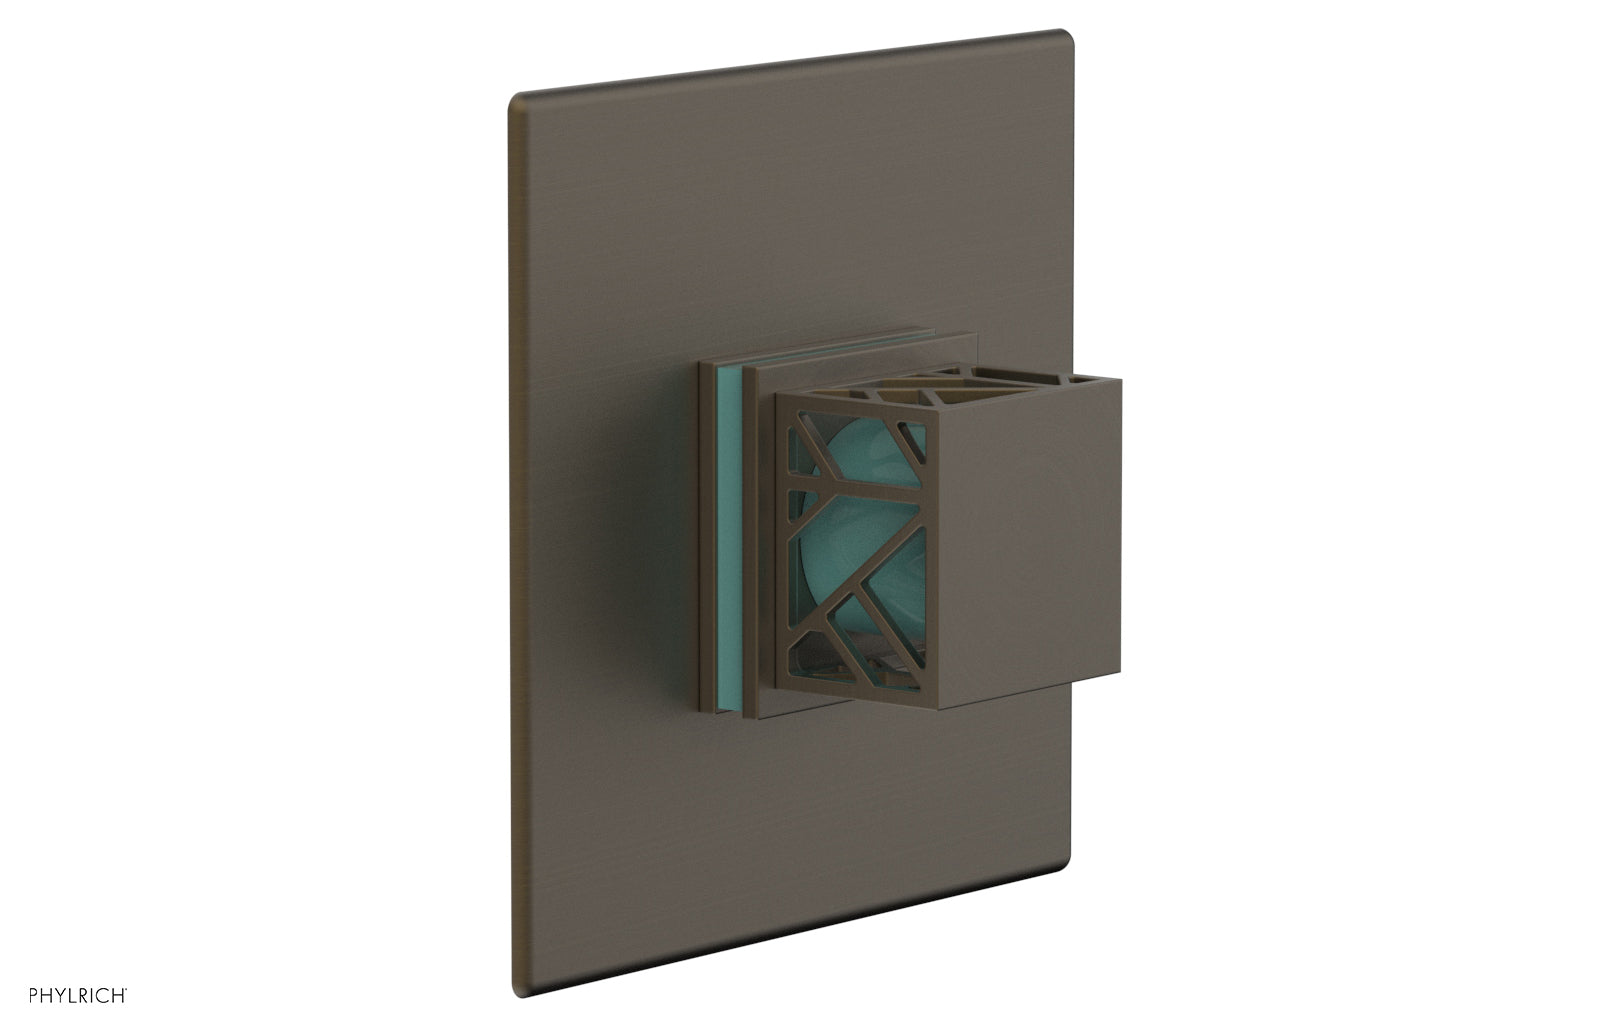 Phylrich JOLIE Pressure Balance Shower Plate & Handle Trim, Square Handle with "Turquoise" Accents